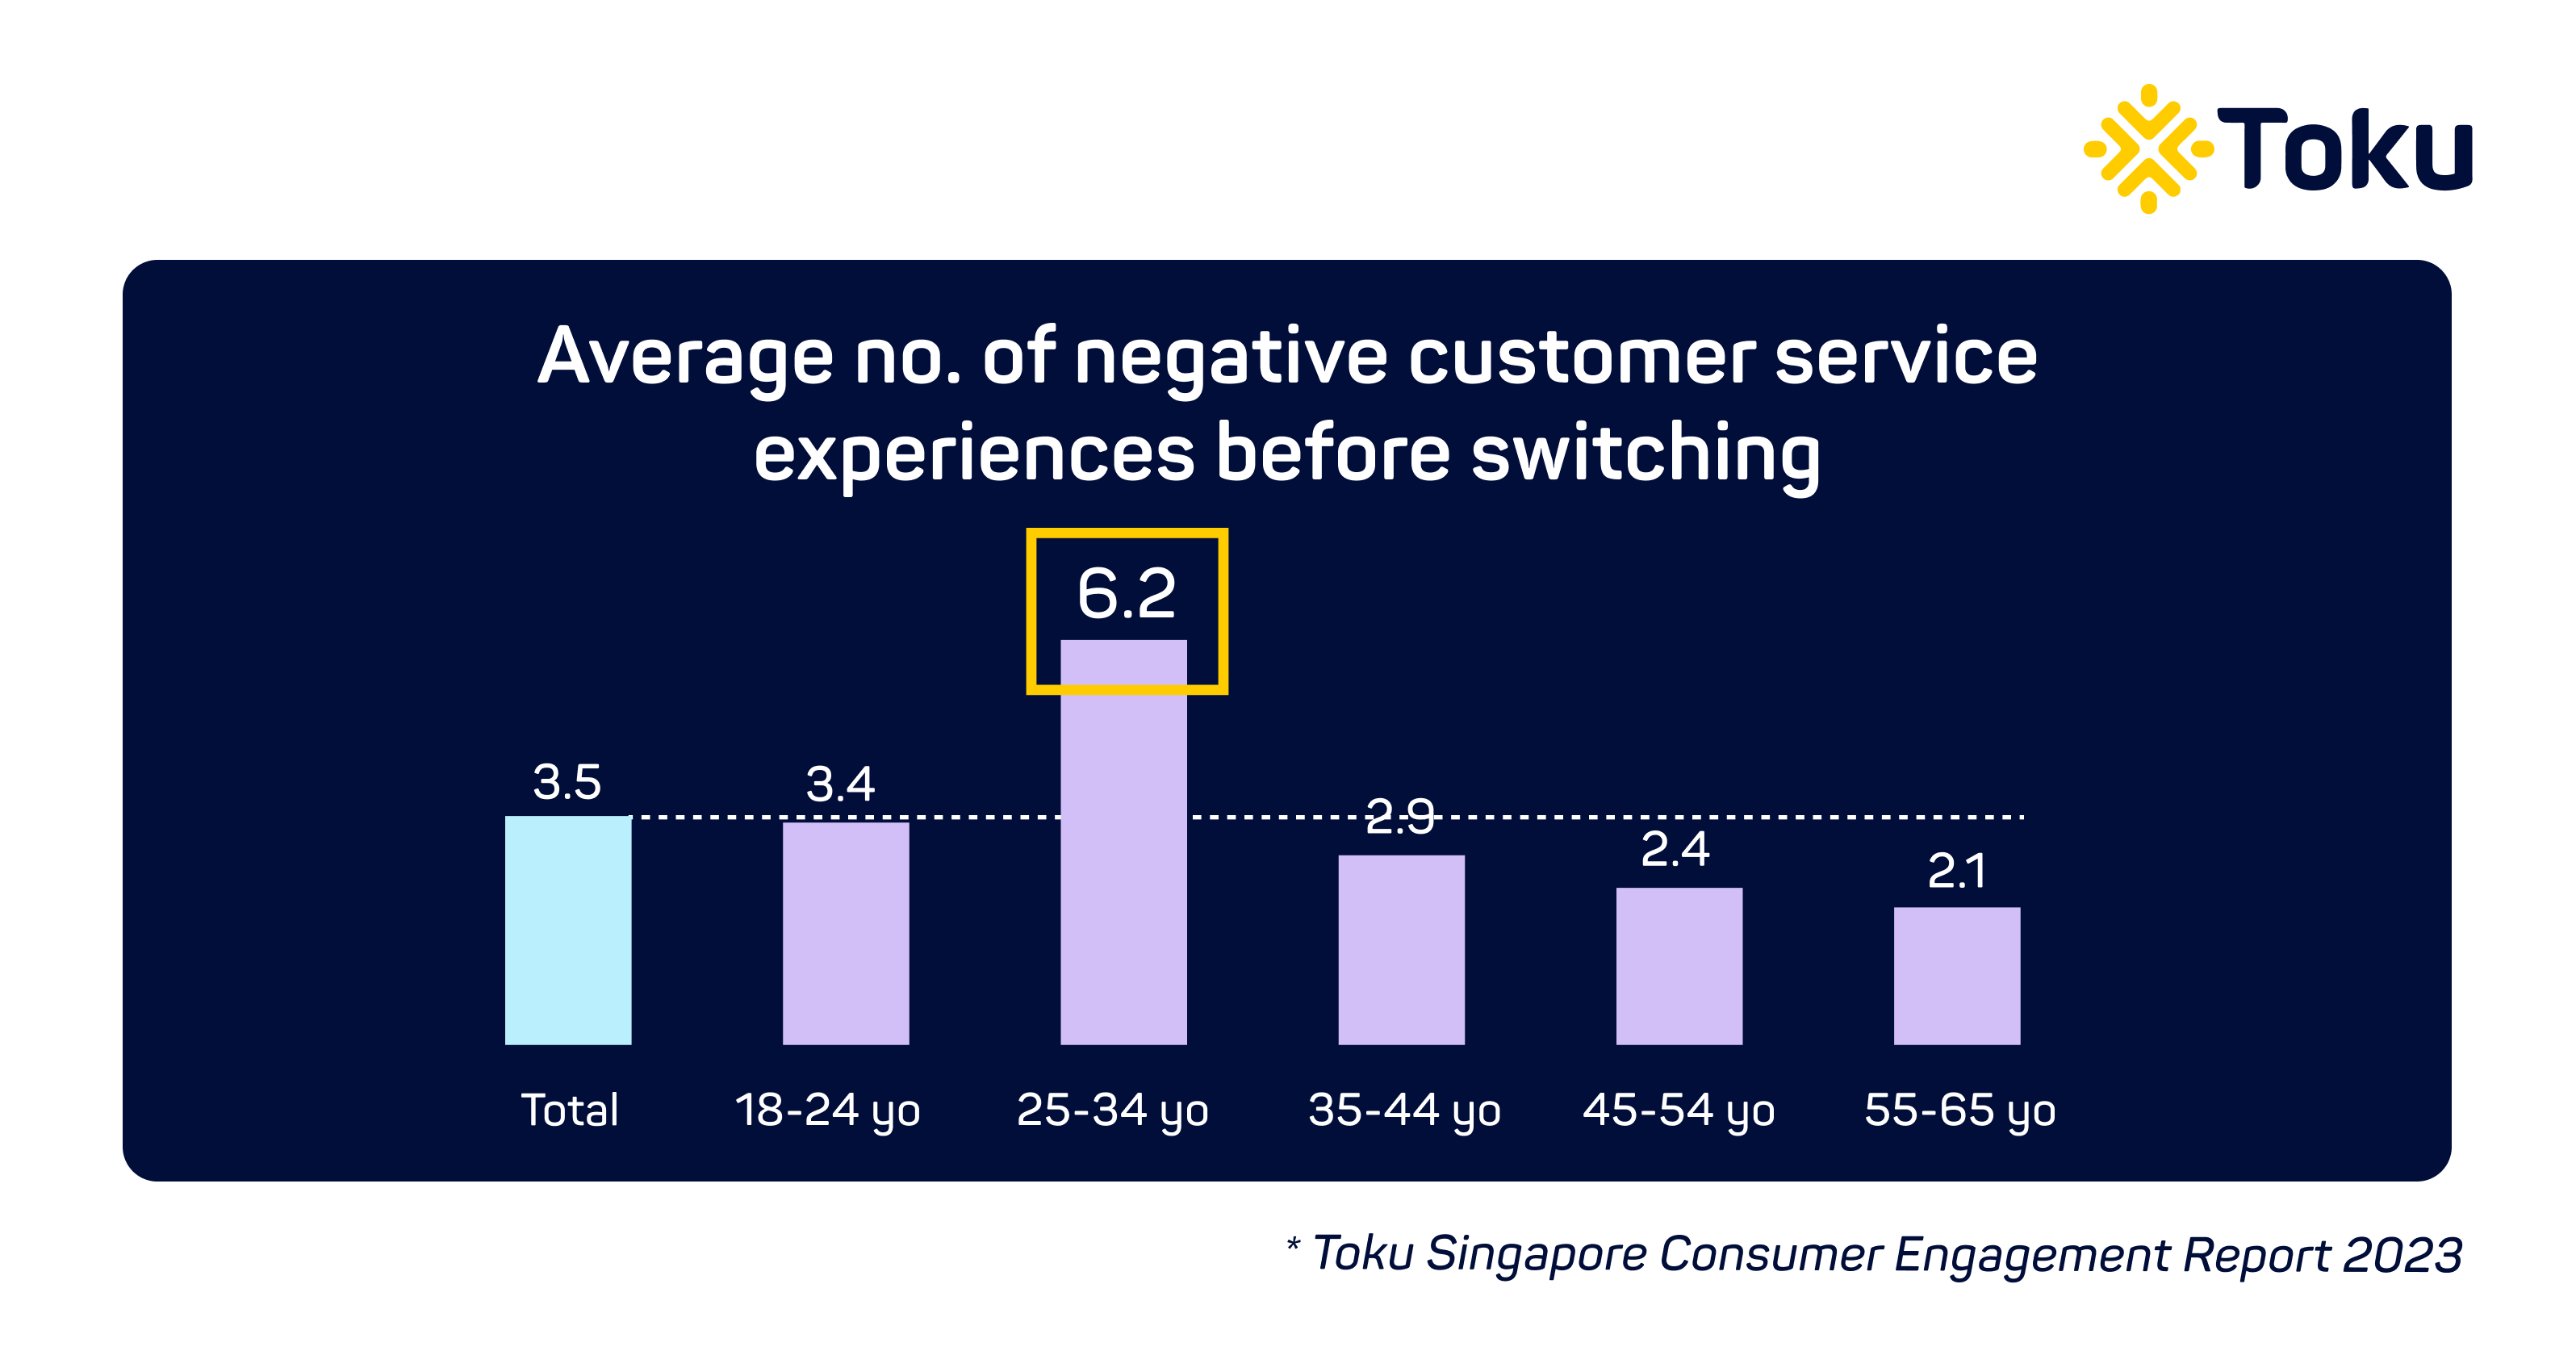 Average number of negative customer service experiences before switch